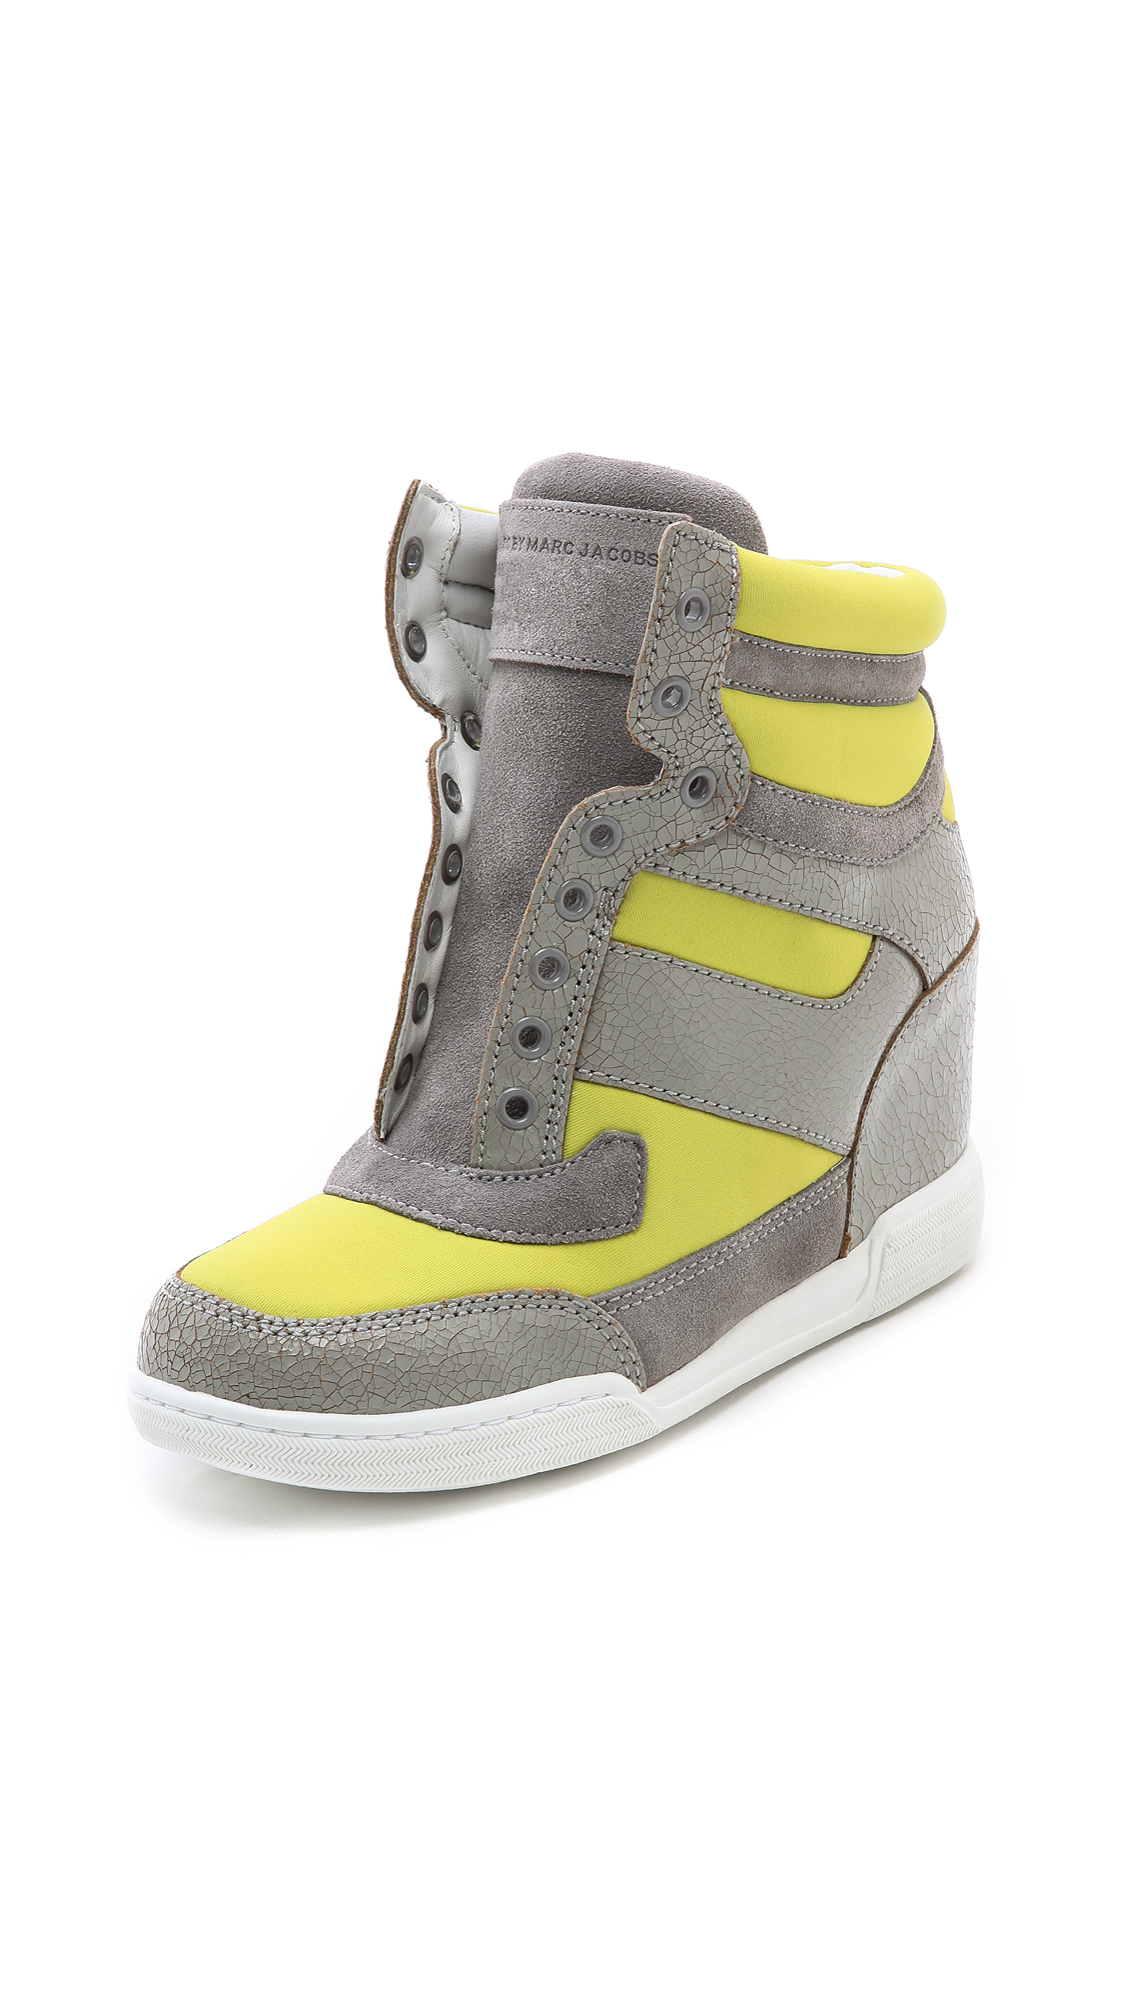 Marc By Marc Jacobs Low Wedge Sneakers in Yellow/Grey (Yellow) - Lyst